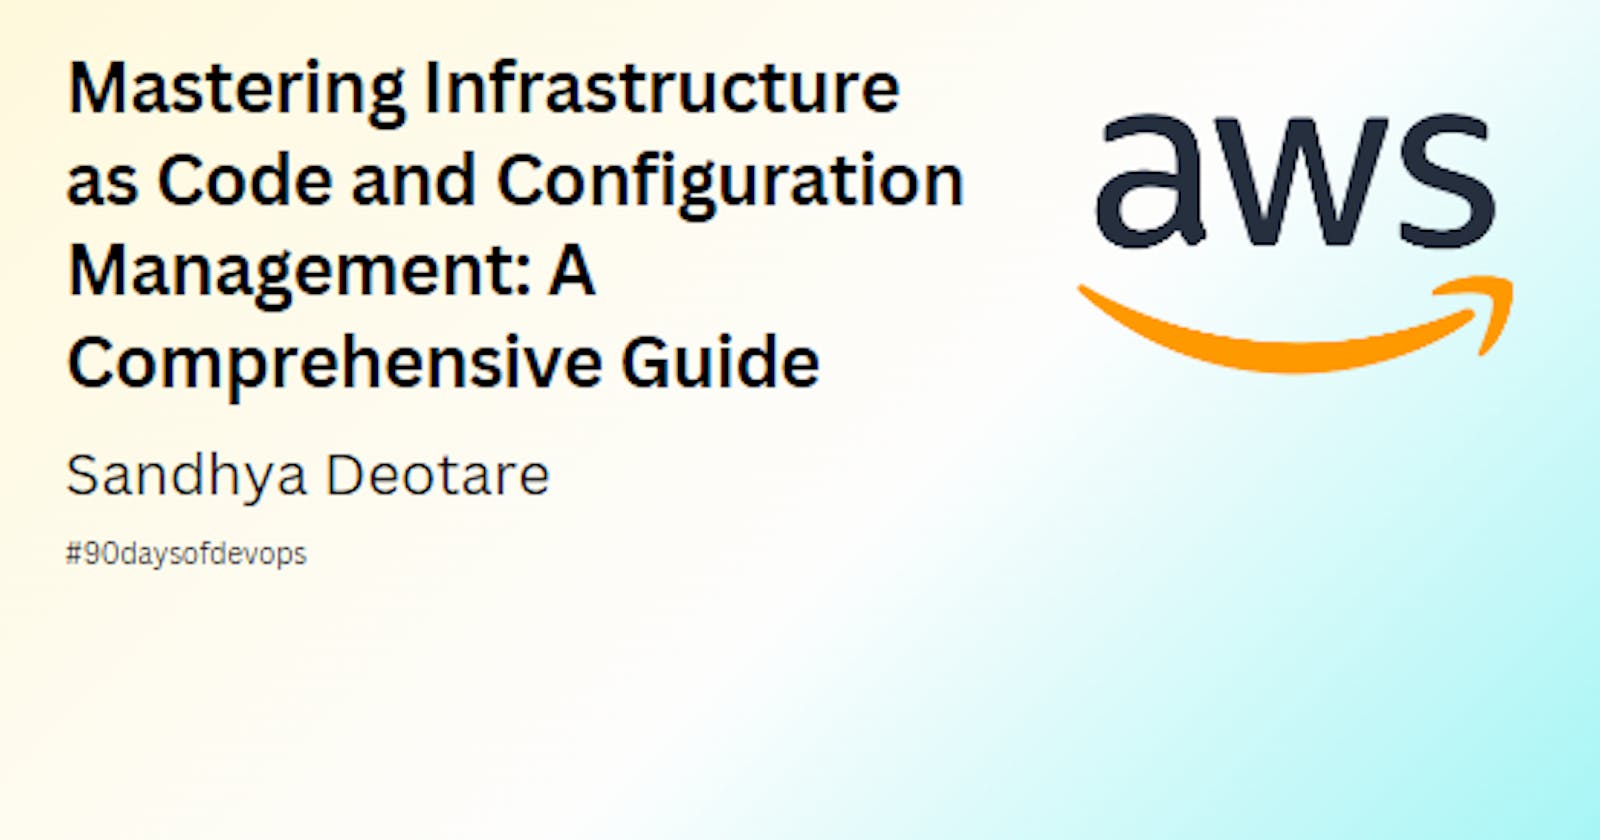 Mastering Infrastructure as Code and Configuration Management: A Comprehensive Guide